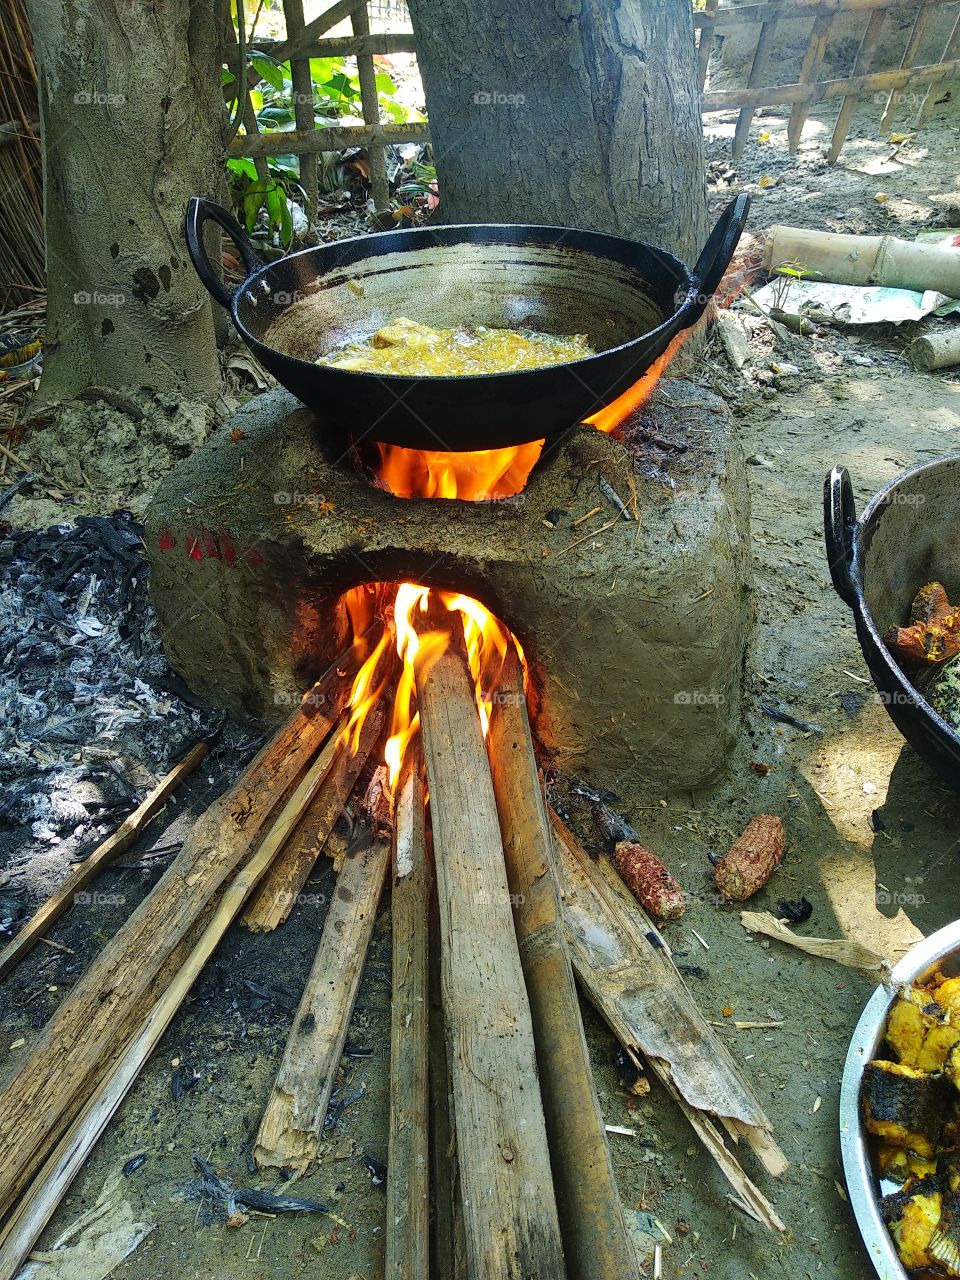 making fish curry at picnic spot in a forest farmhouse .